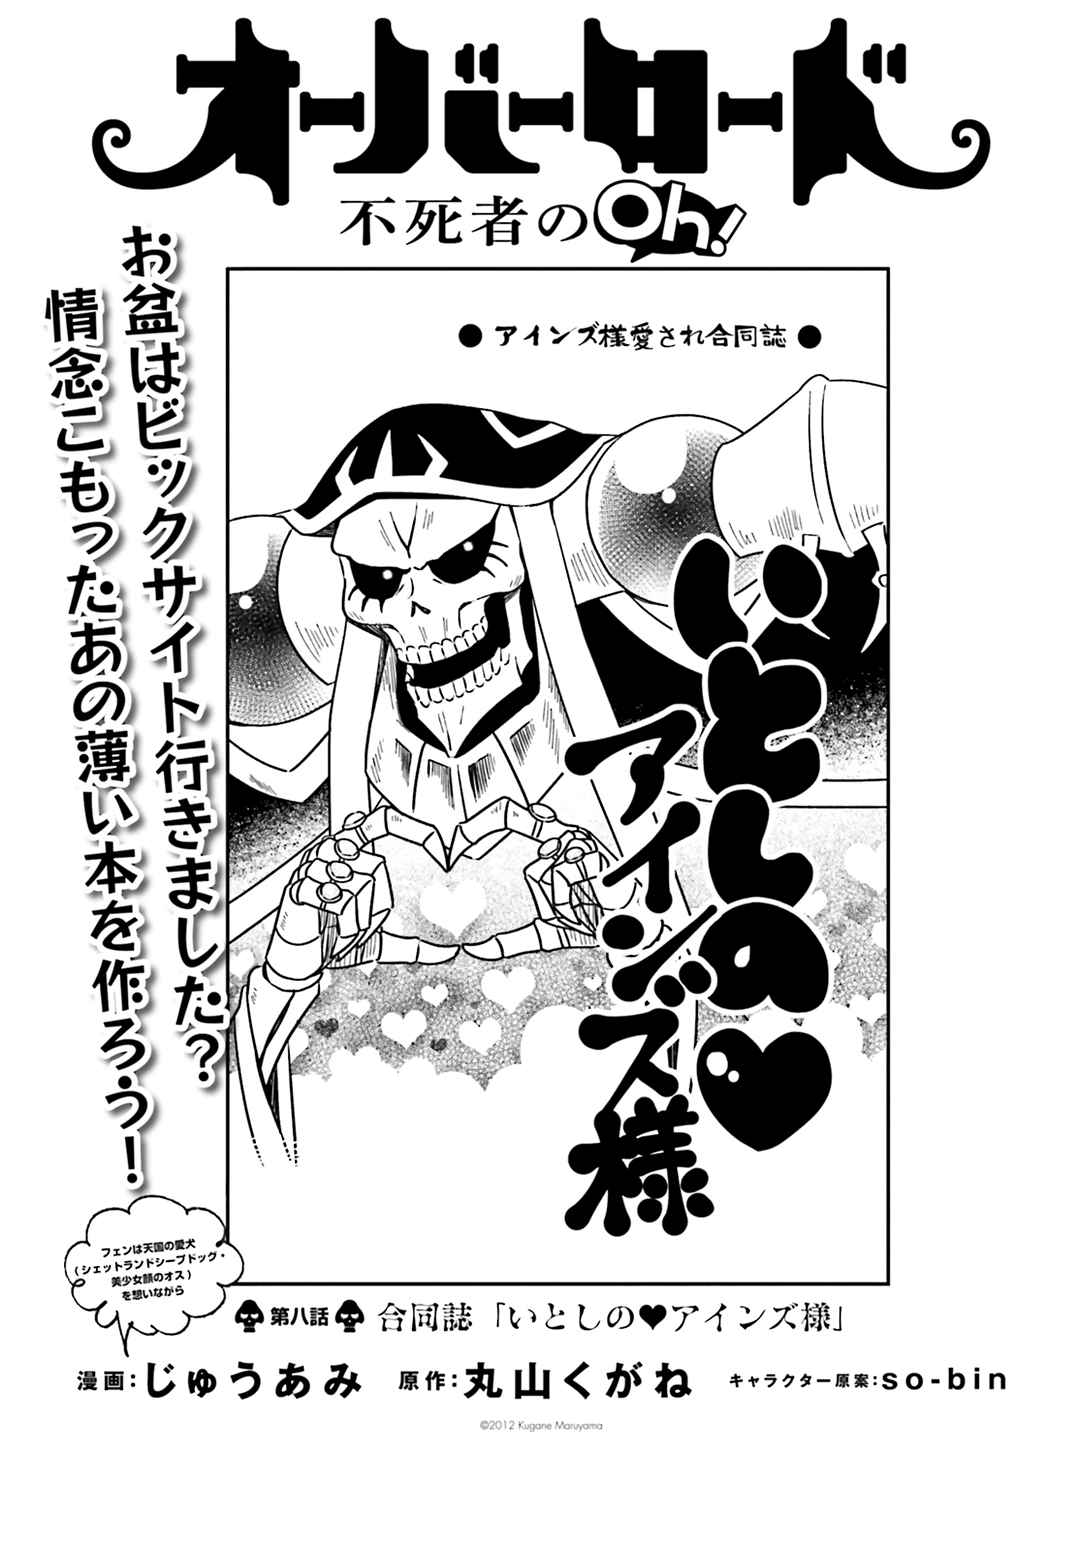 Overlord The Undead King Oh! Vol. 2 Ch. 8